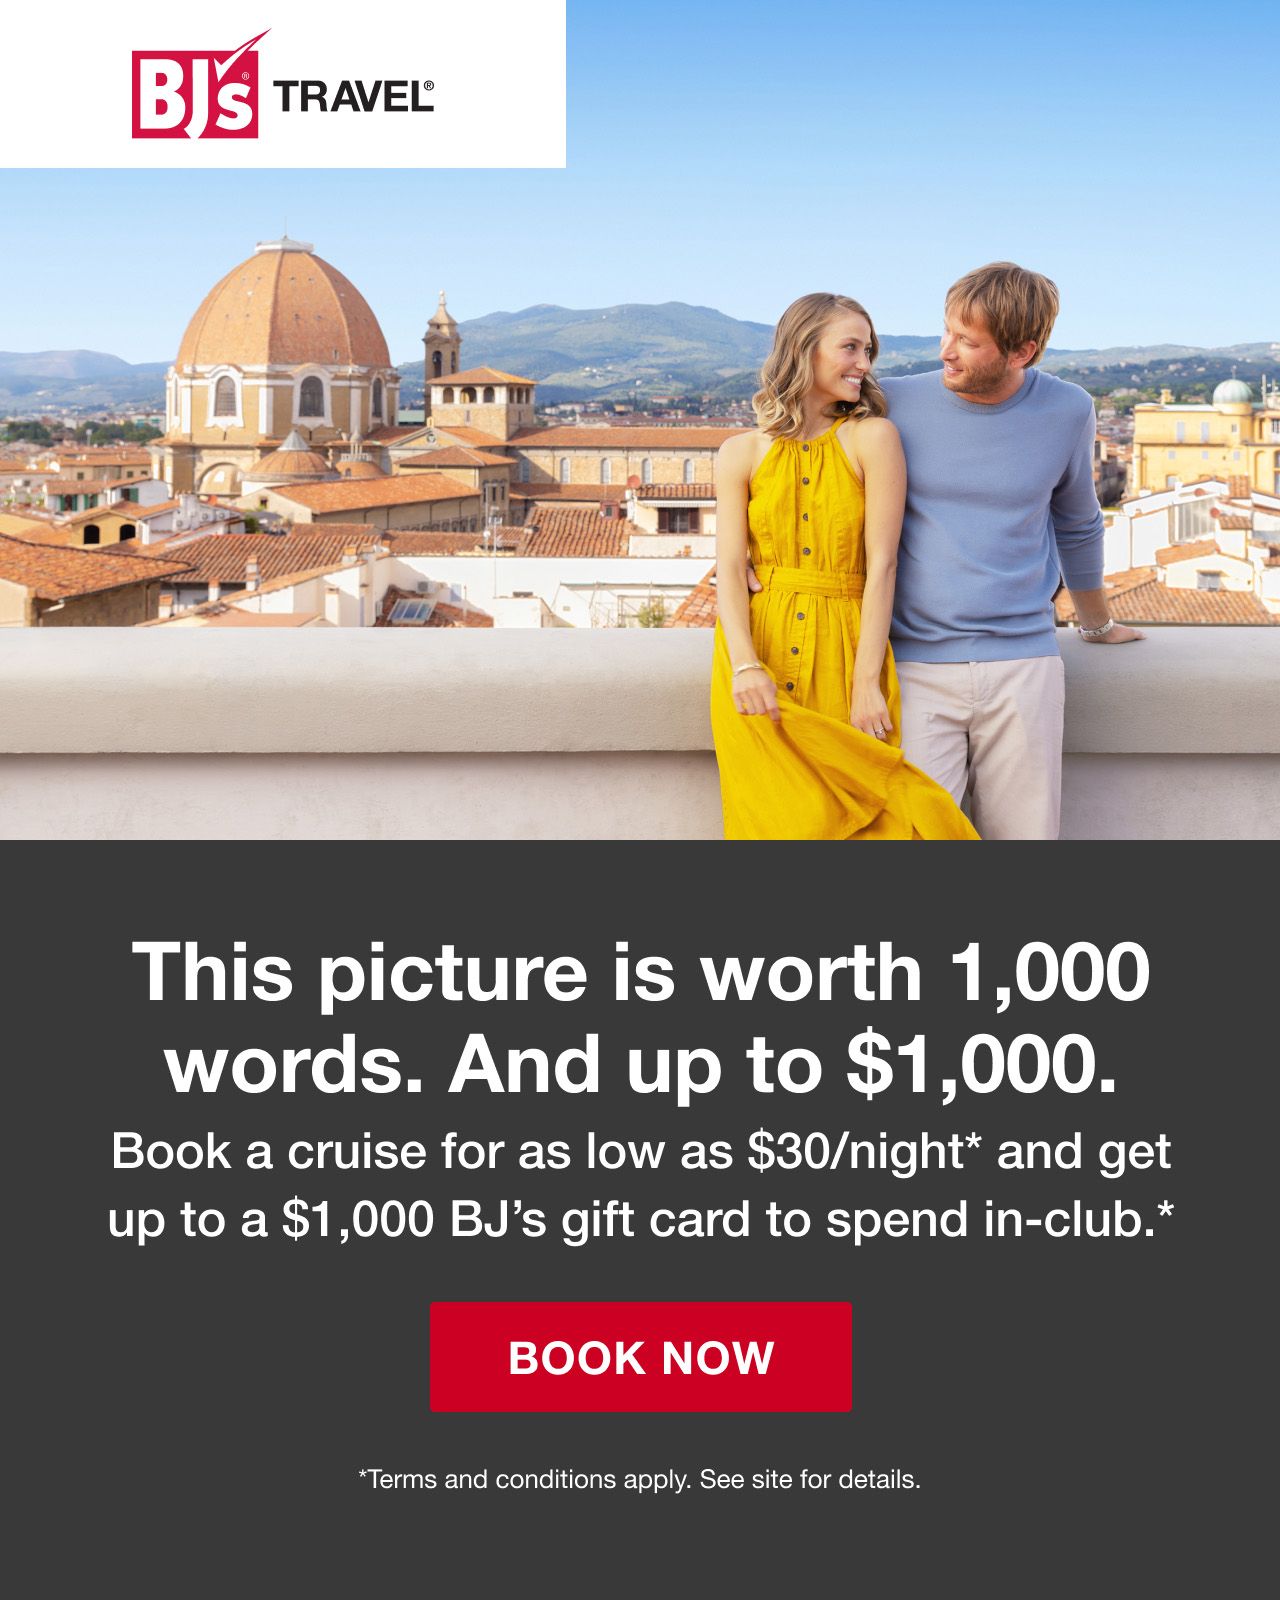 BJ's Travel. Click here to book now